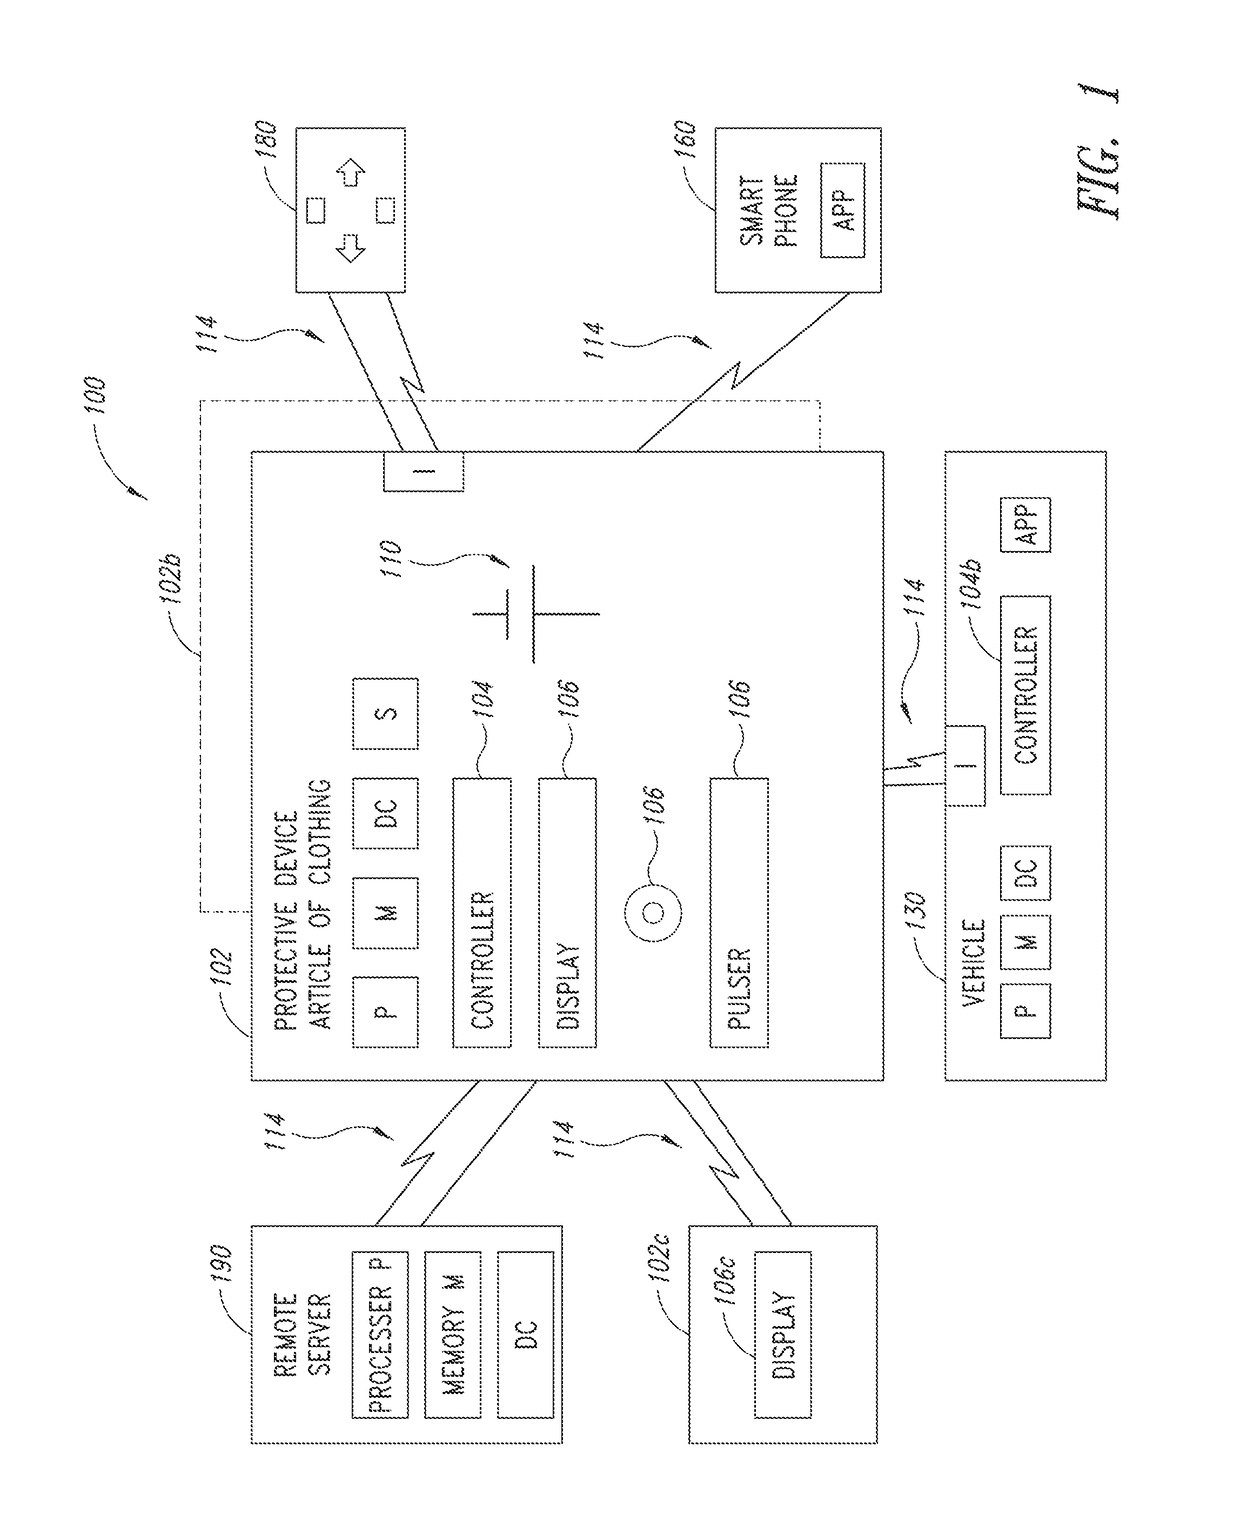 Personal safety device, method and article